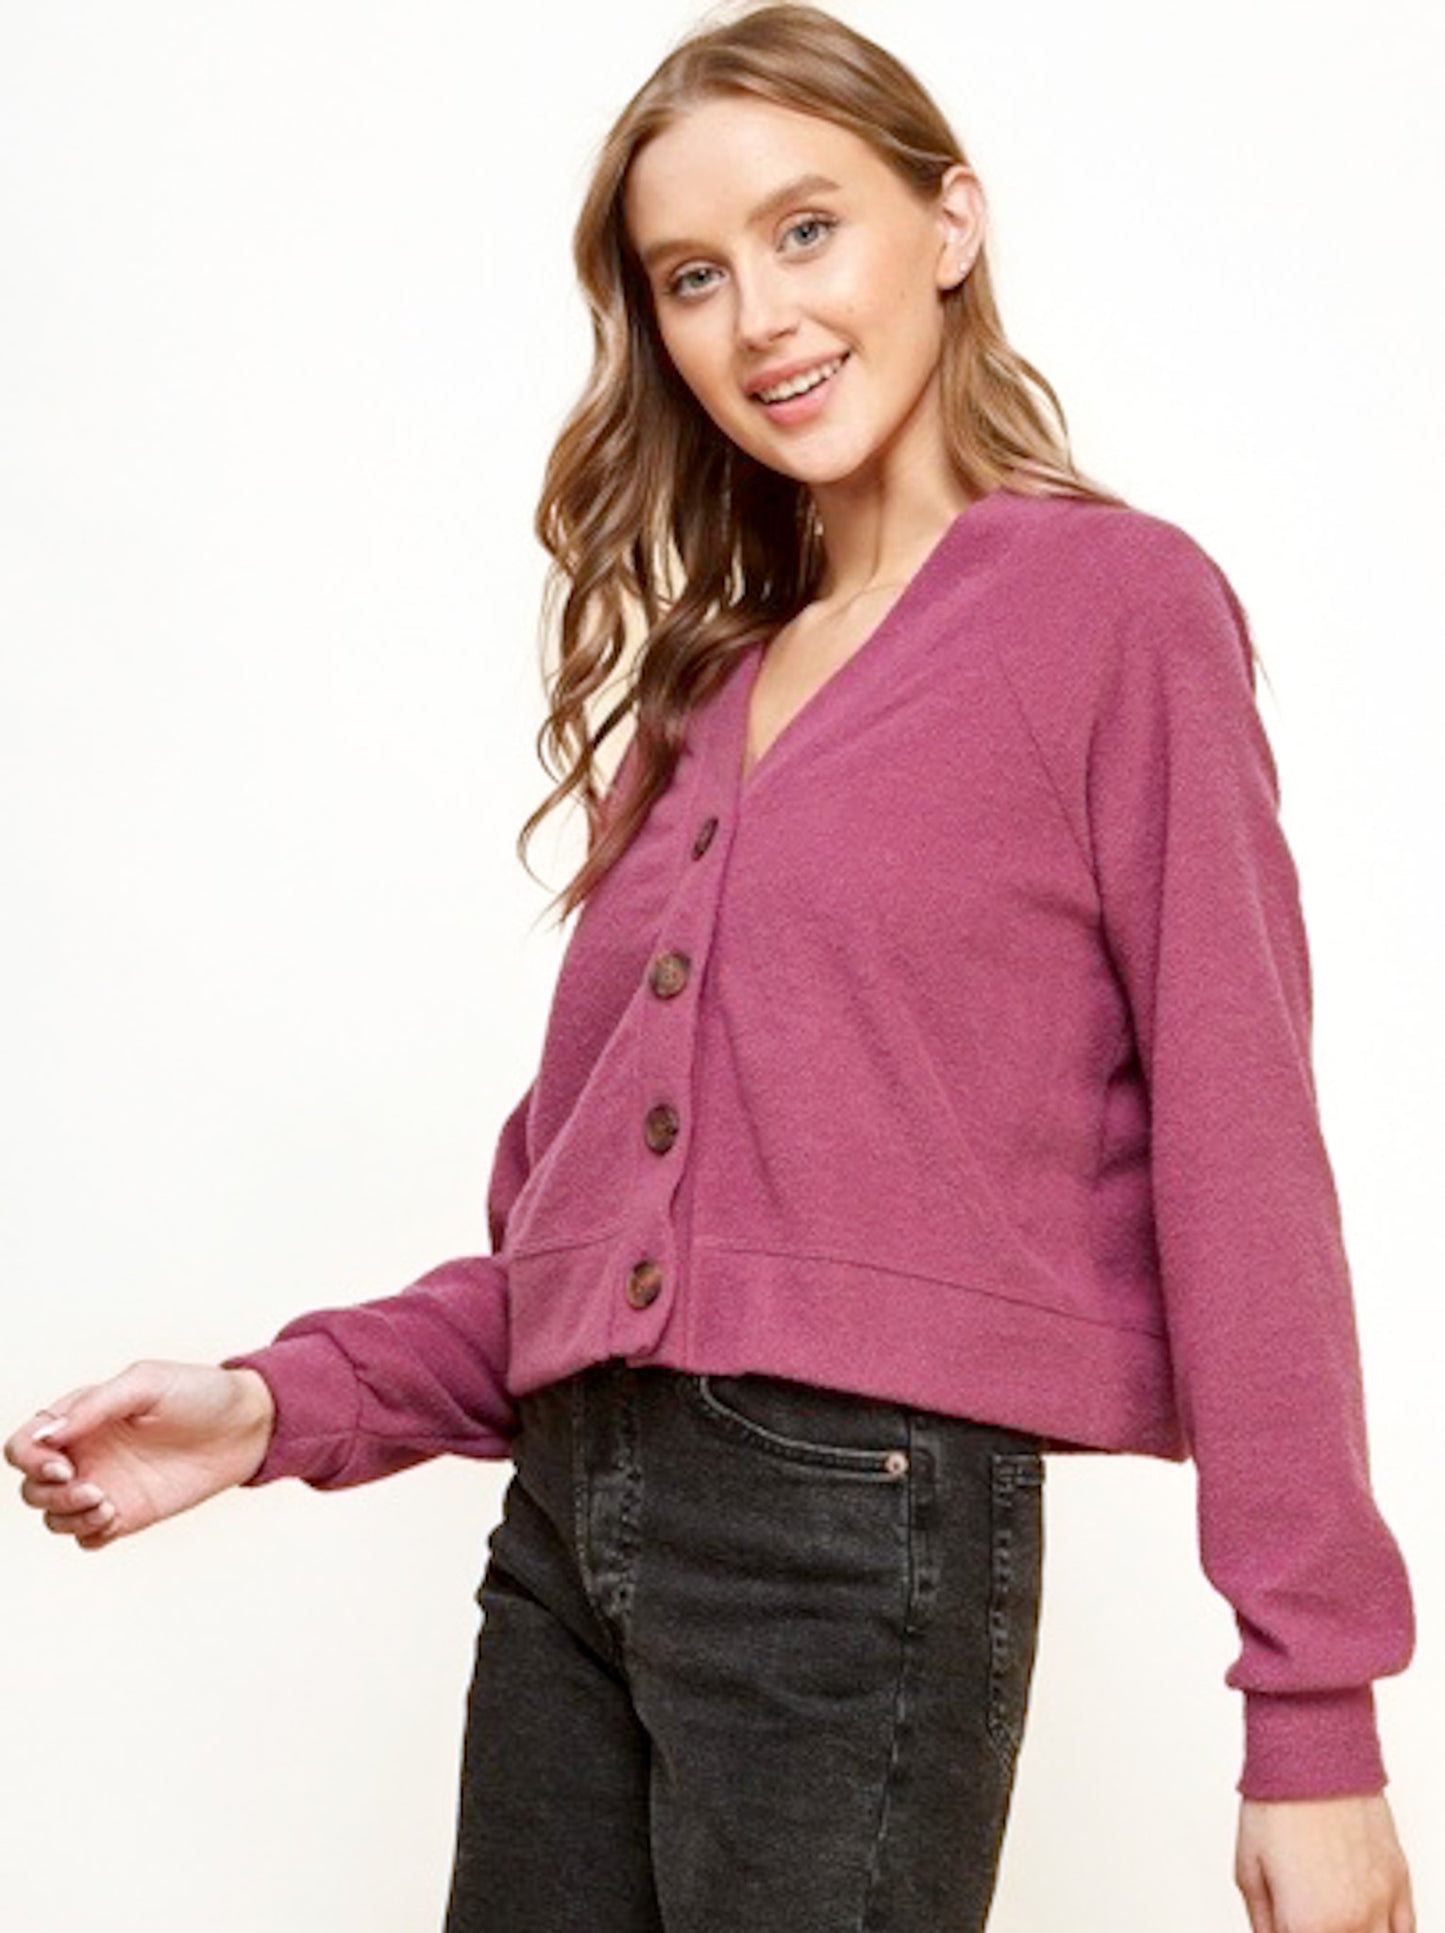 Magenta Soft Cardigan with 4 Buttons -Made in USA